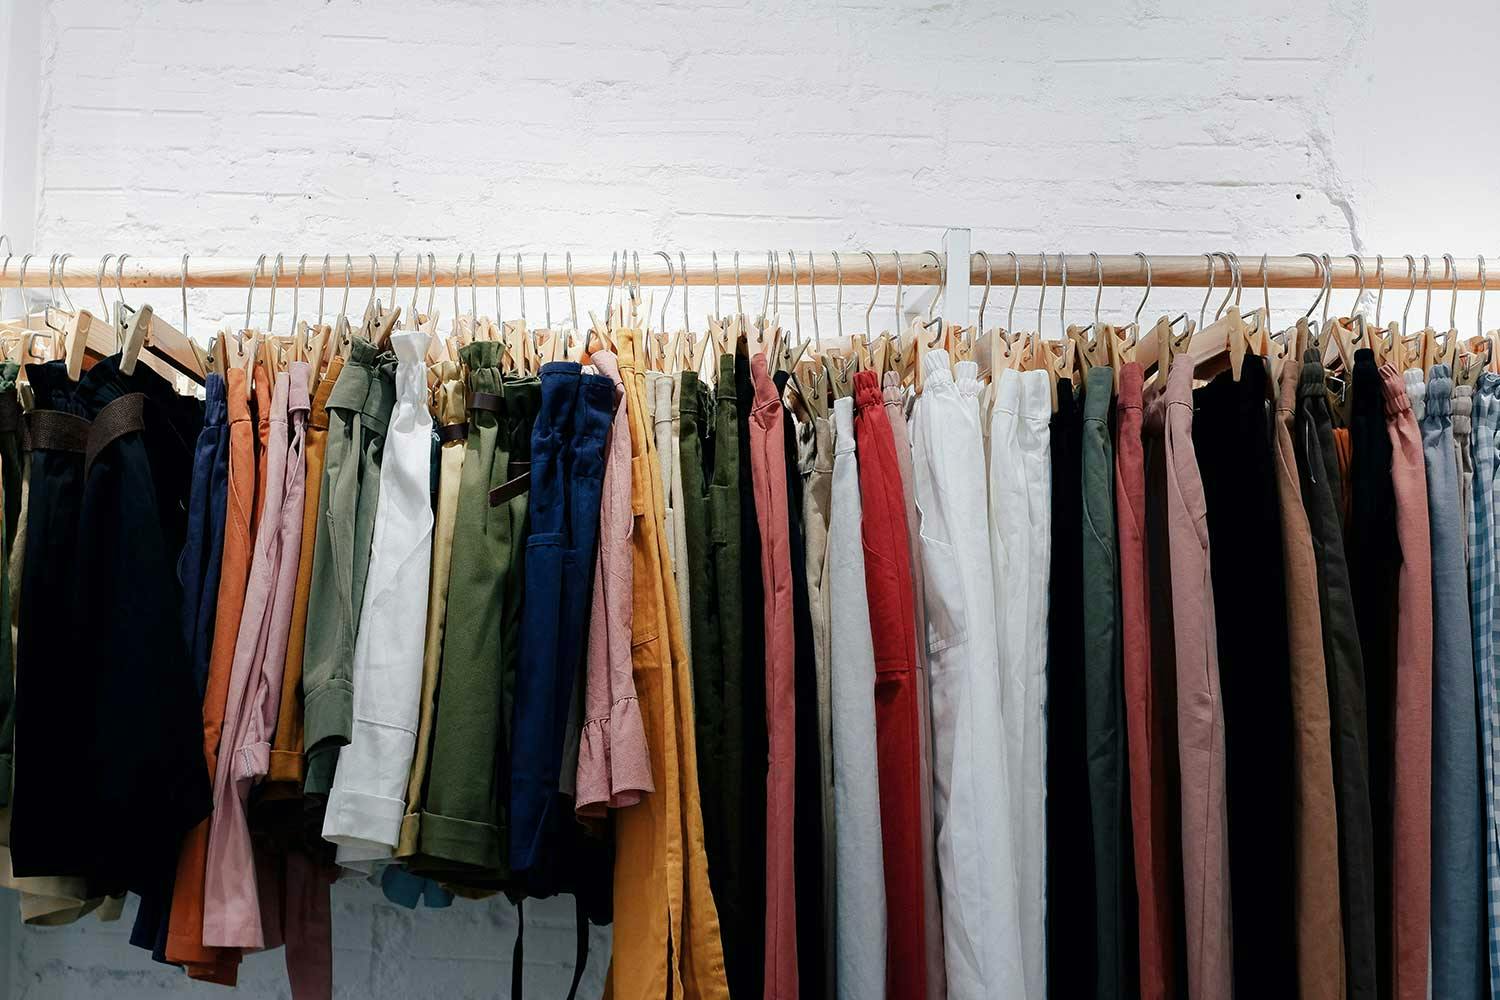 A rack of shorts, skirts, and pants of various styles and colours on pants hangers, against a white brick wall.